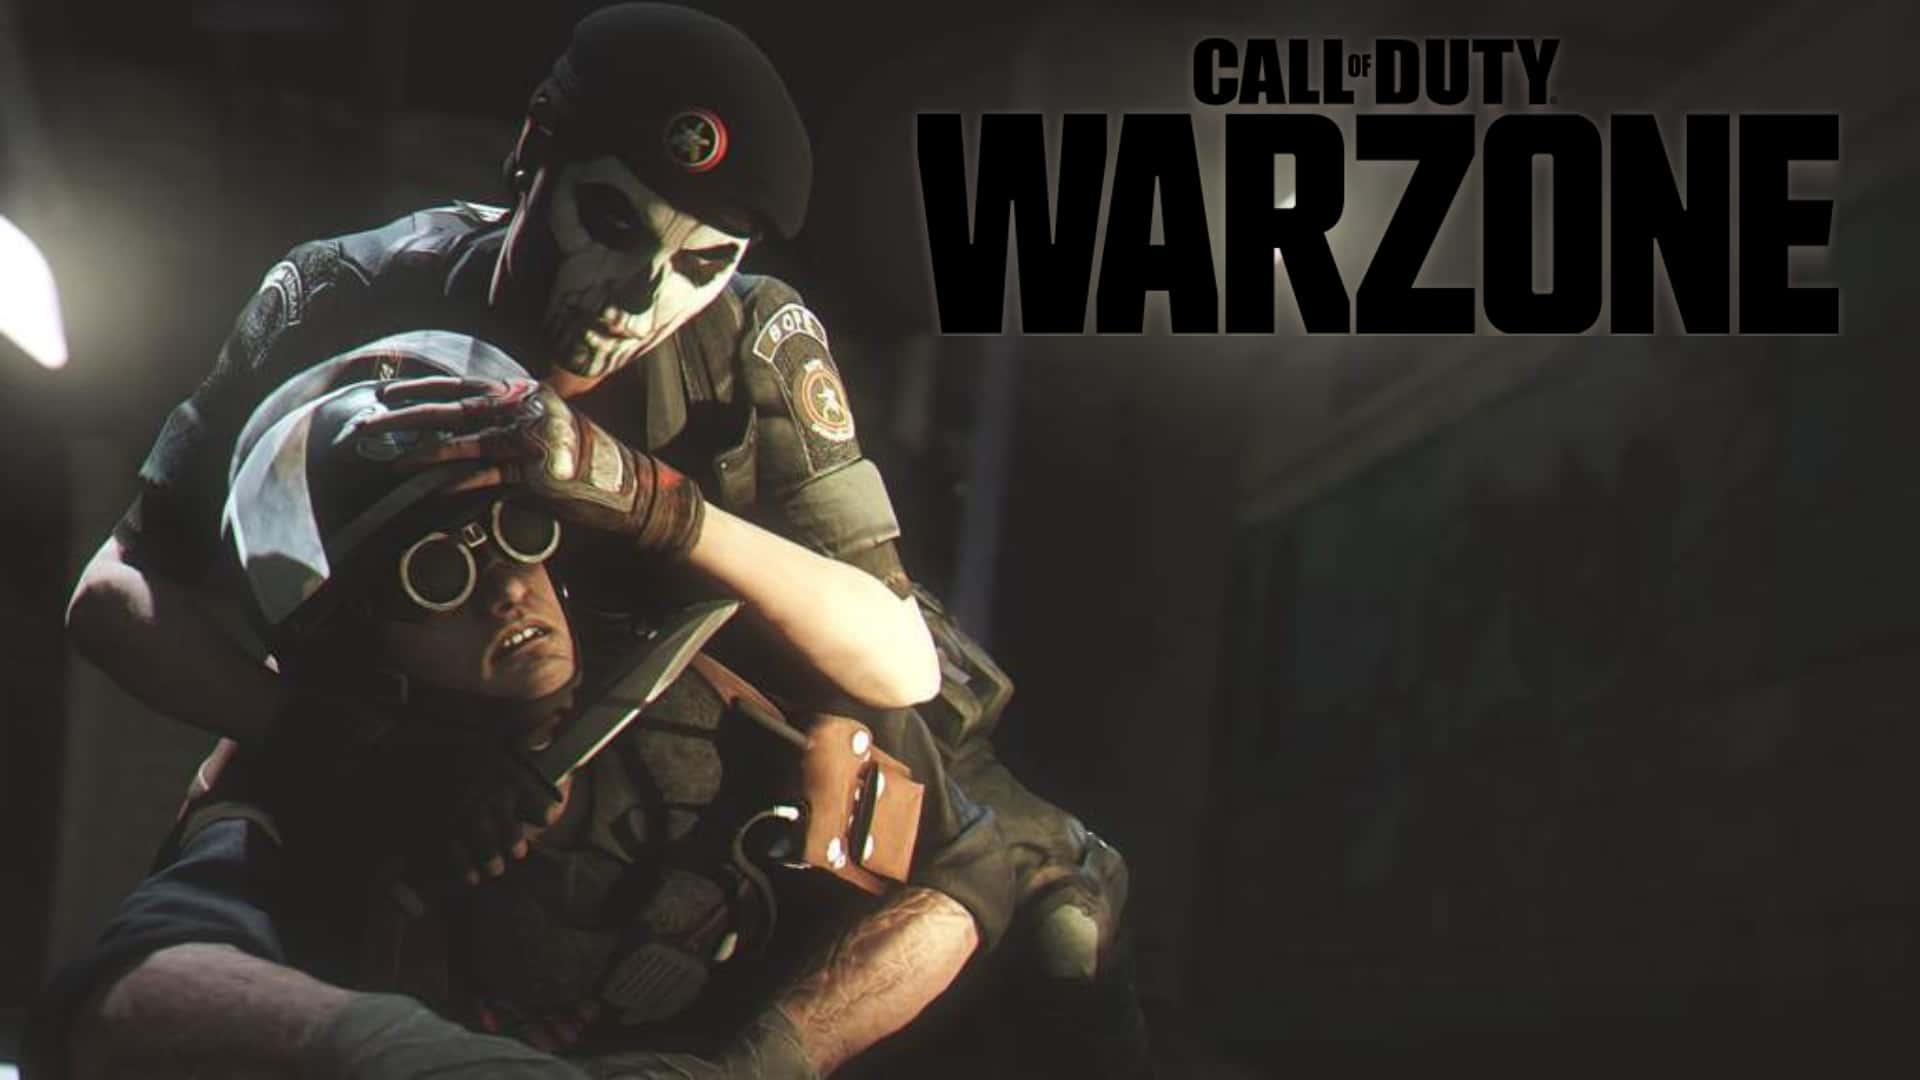 call-of-duty-warzone-2-will-introduce-an-interrogation-feature-rumour-GamersRD